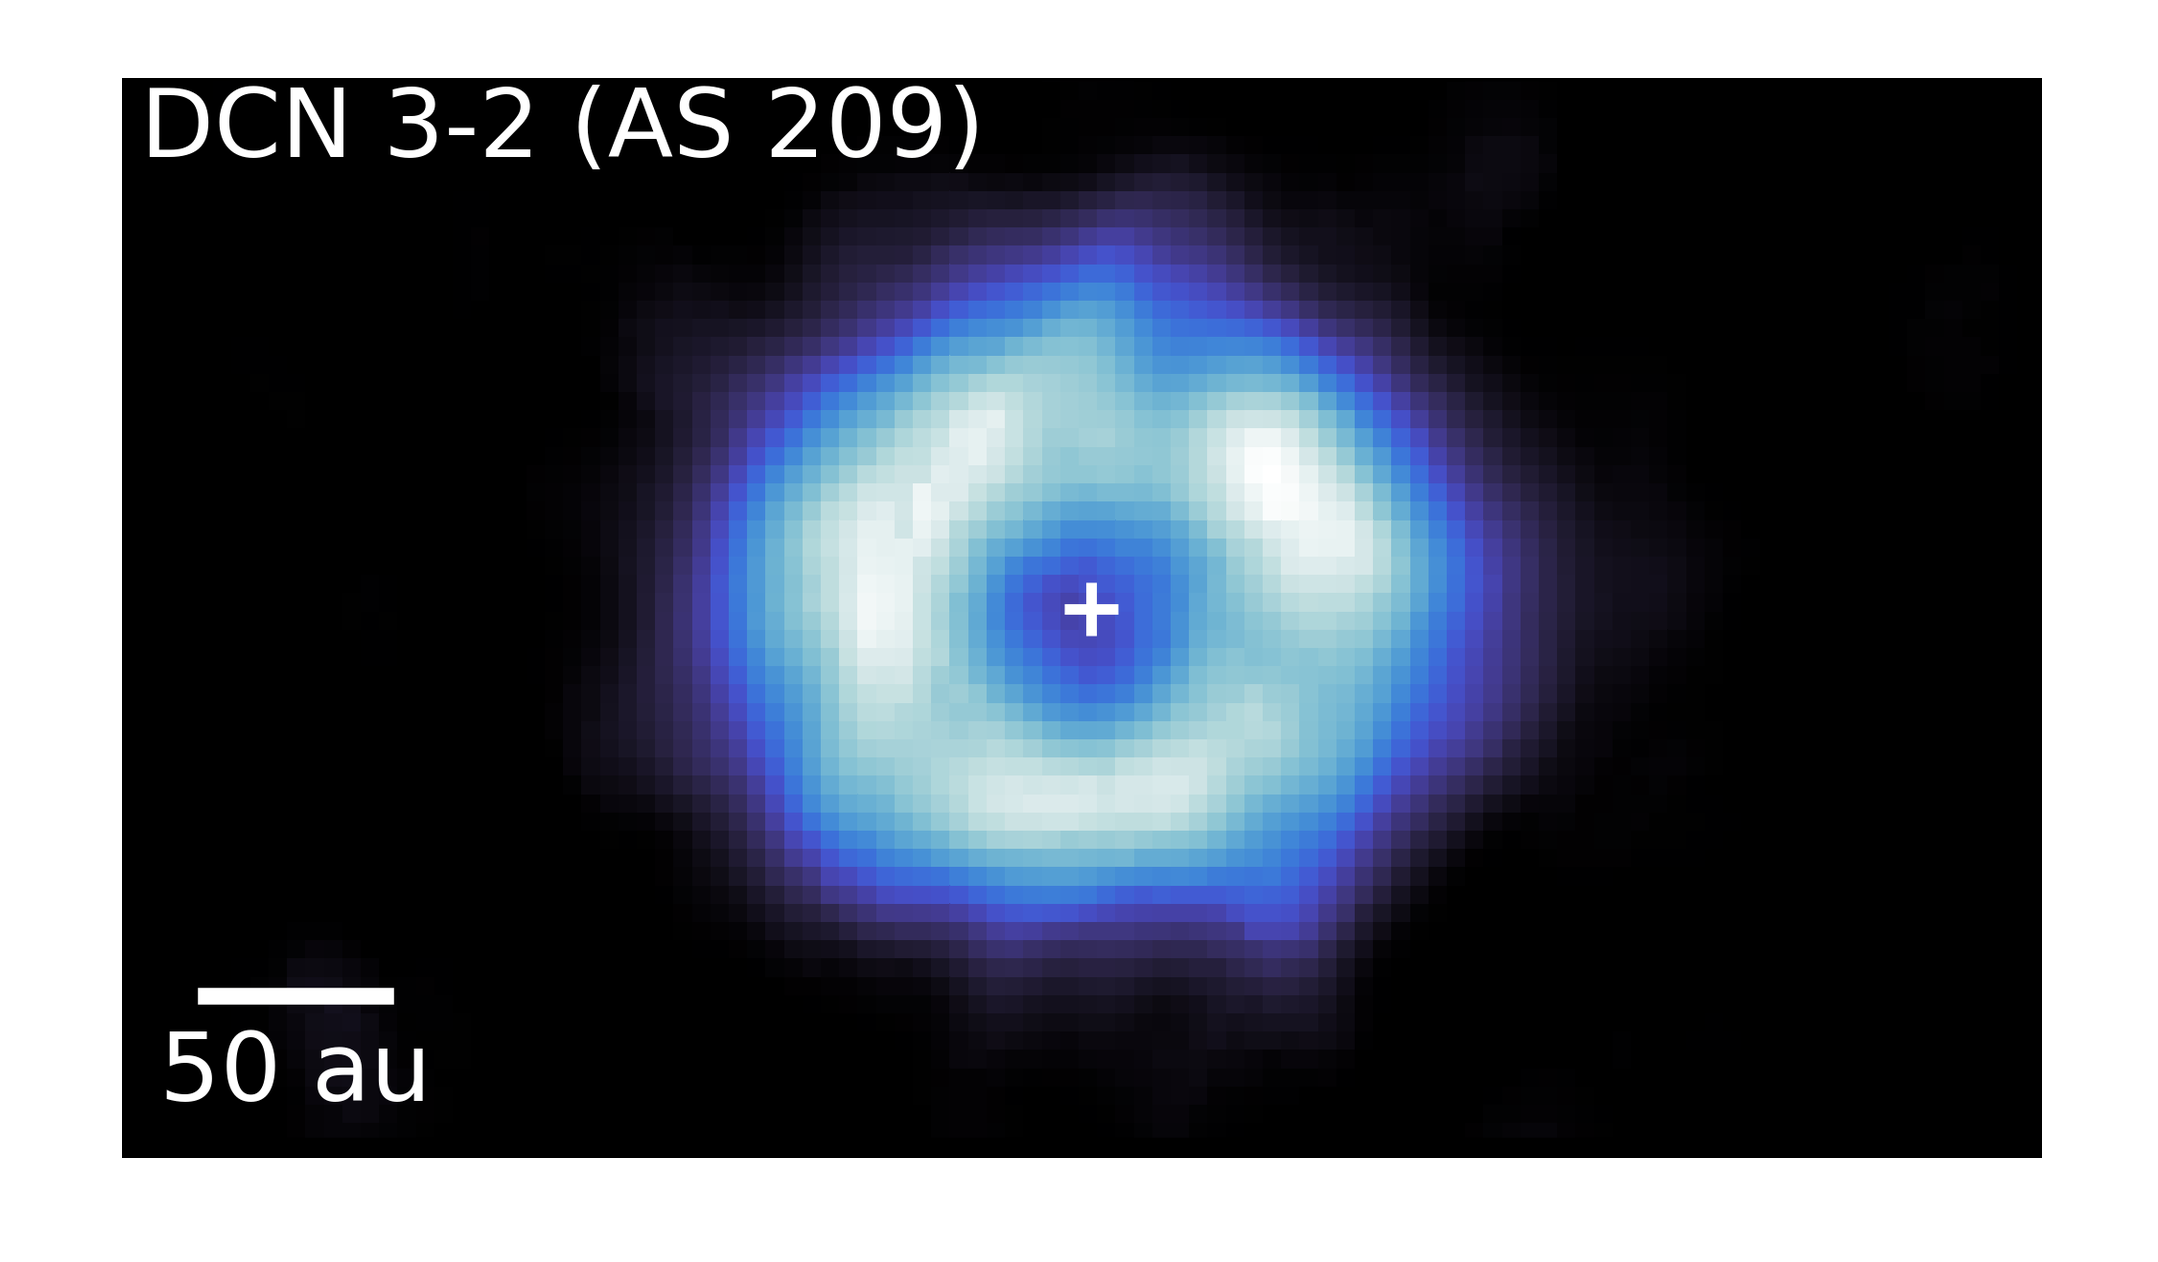 The ring of DCN gas around the young star AS 209. DCN is a form of hydrogen cyanide (HCN), with the hydrogen atom (H) replaced by a deuterium atom (D, also known as heavy hydrogen). The position of the star is marked by the white cross. 1 au is the distance between the Earth and the Sun.